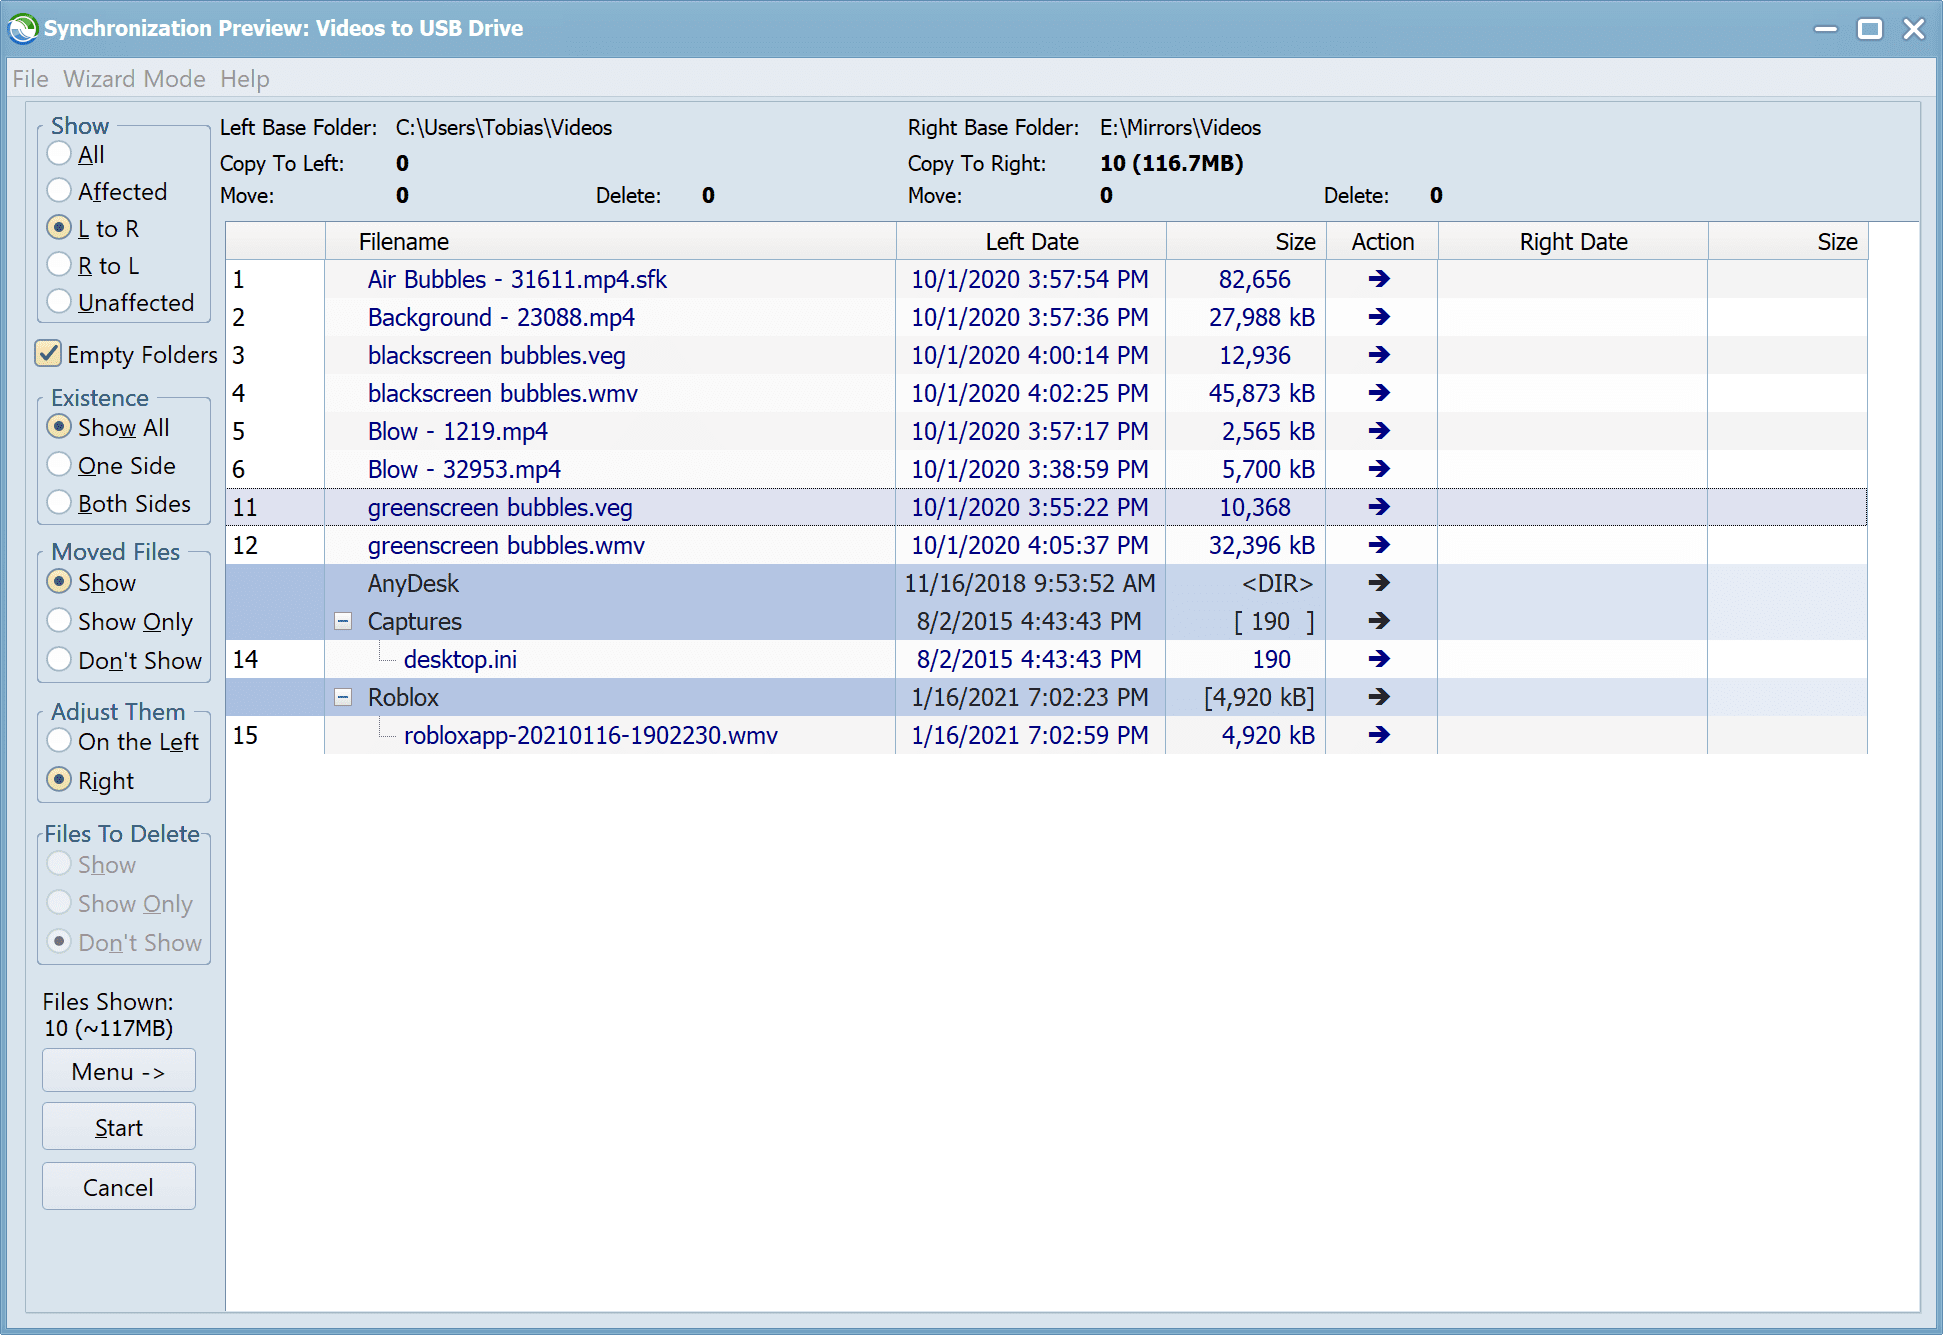 Screenshot of the Sync Preview in which Syncovery shows which files are going to be copied, moved, and deleted, allowing the user to confirm the proposed actions